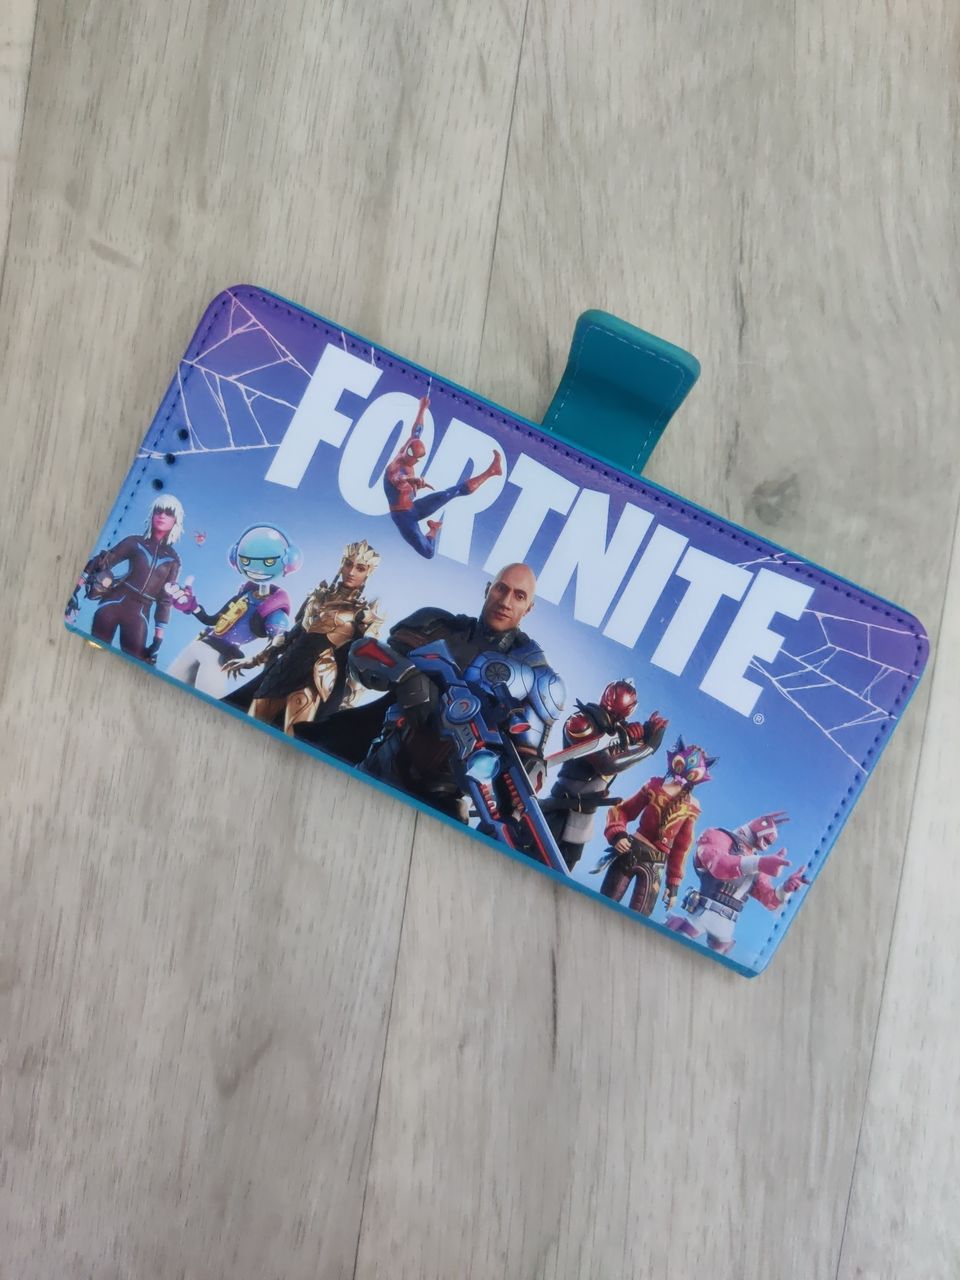 Fortnite One Plus Nord CE 2 5g kuoret